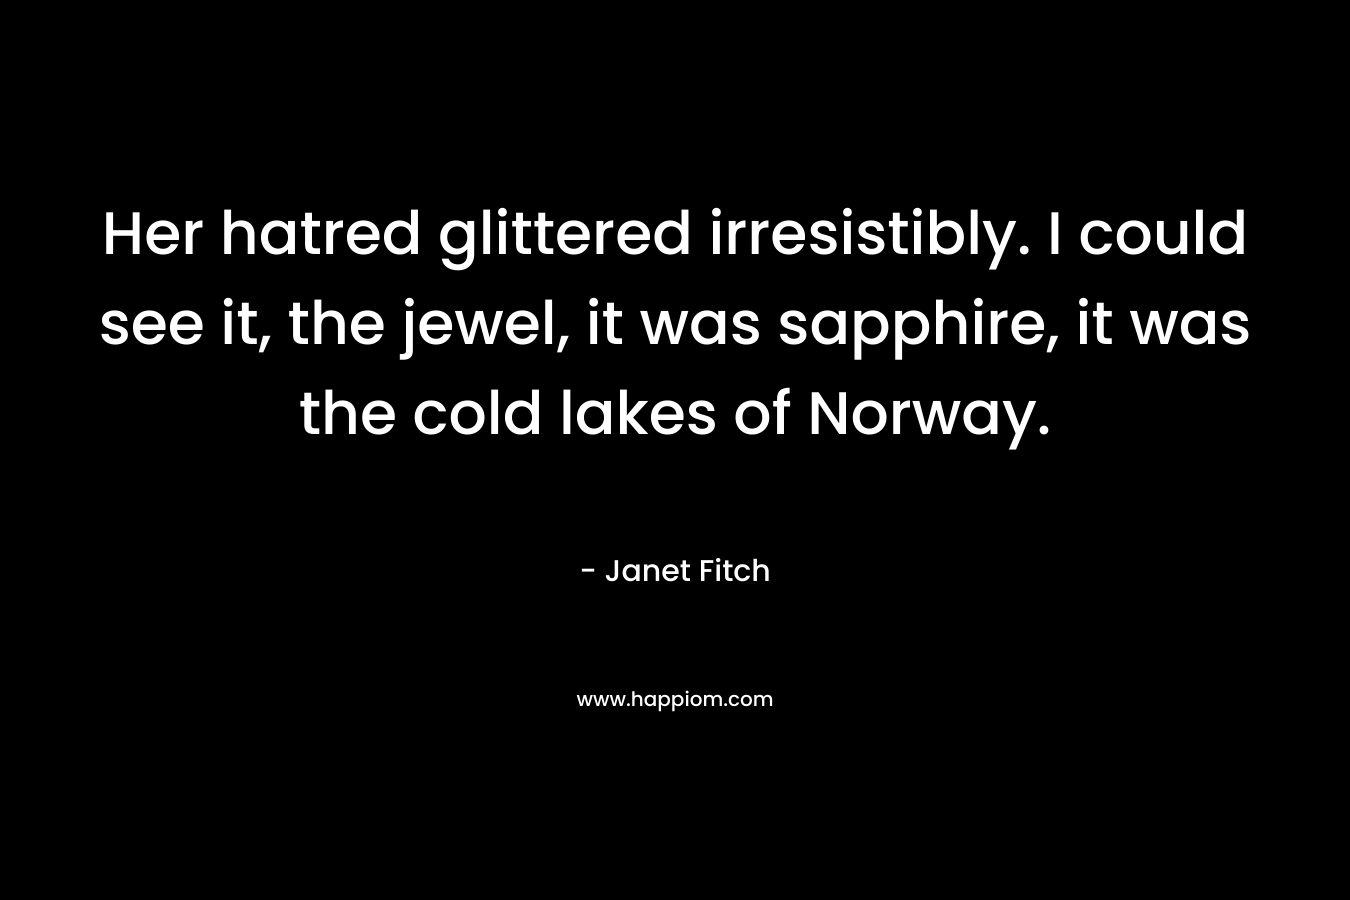 Her hatred glittered irresistibly. I could see it, the jewel, it was sapphire, it was the cold lakes of Norway.